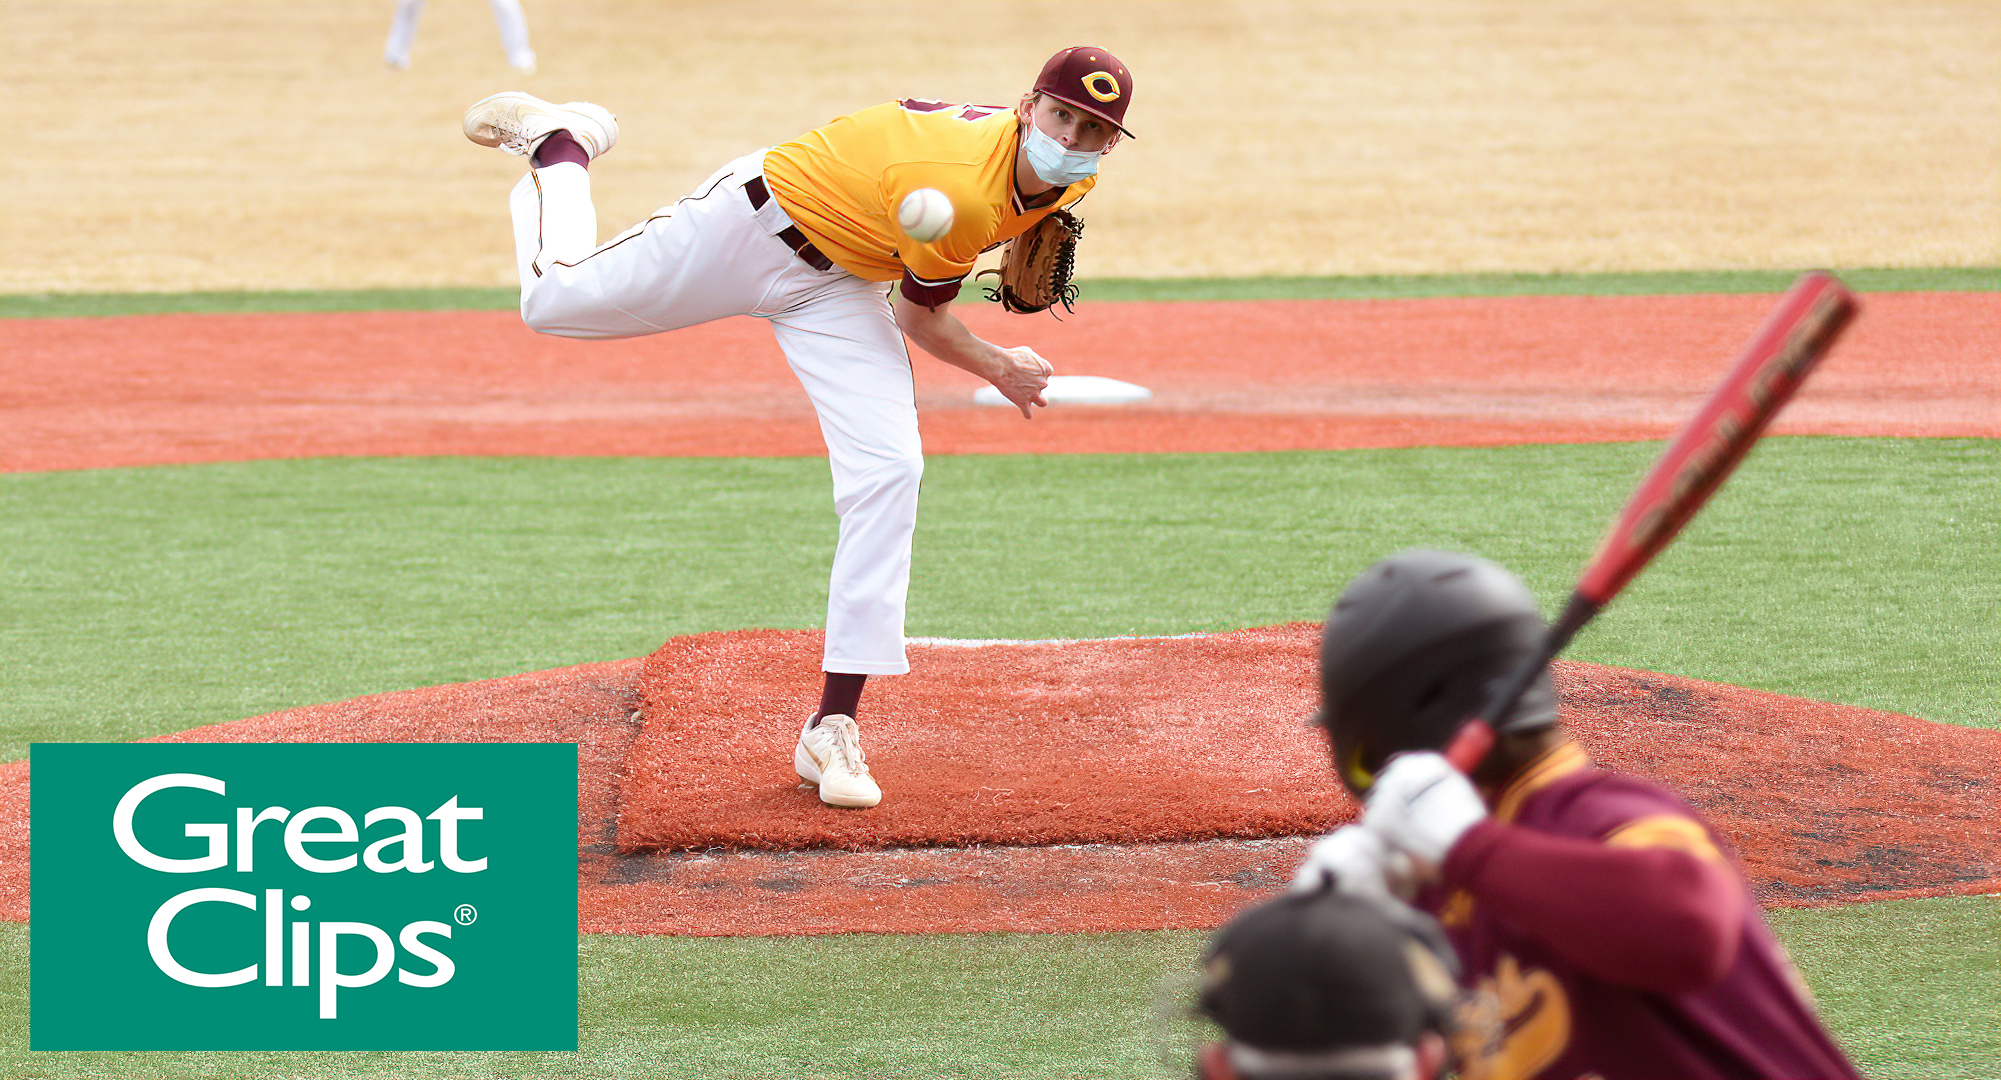 Ty Syverson posted a career-high 14 strikeouts and didn't allow a run in 8.0 innings pitched in the Cobbers' Game 2 win at Augsburg.